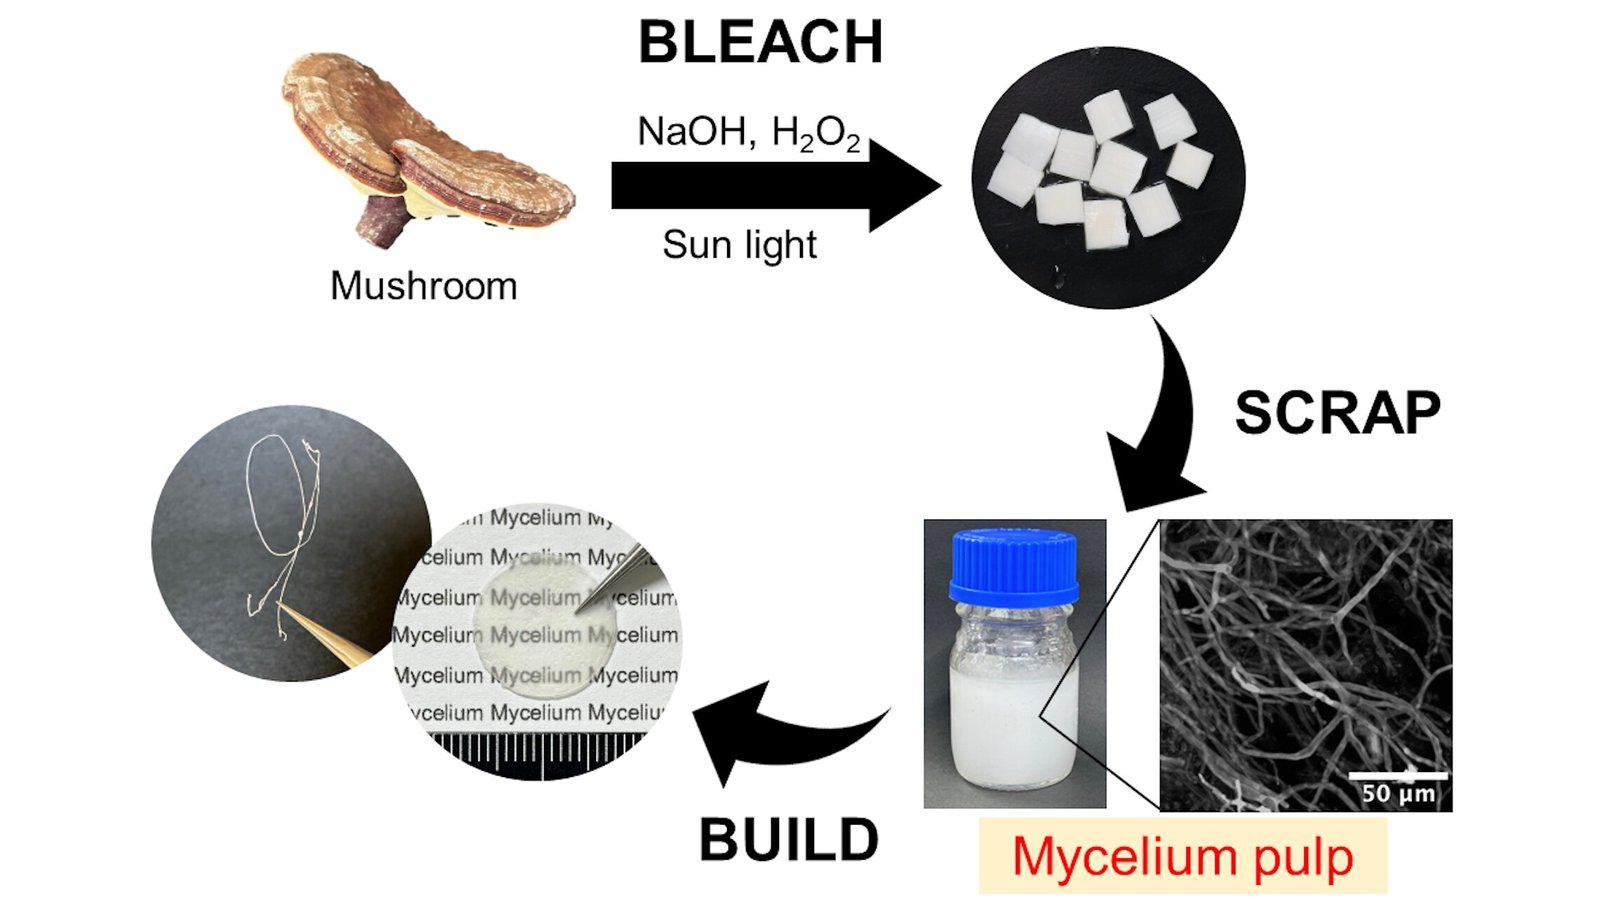 A novel strategy for extracting mycelial fibers for mushroom based materials